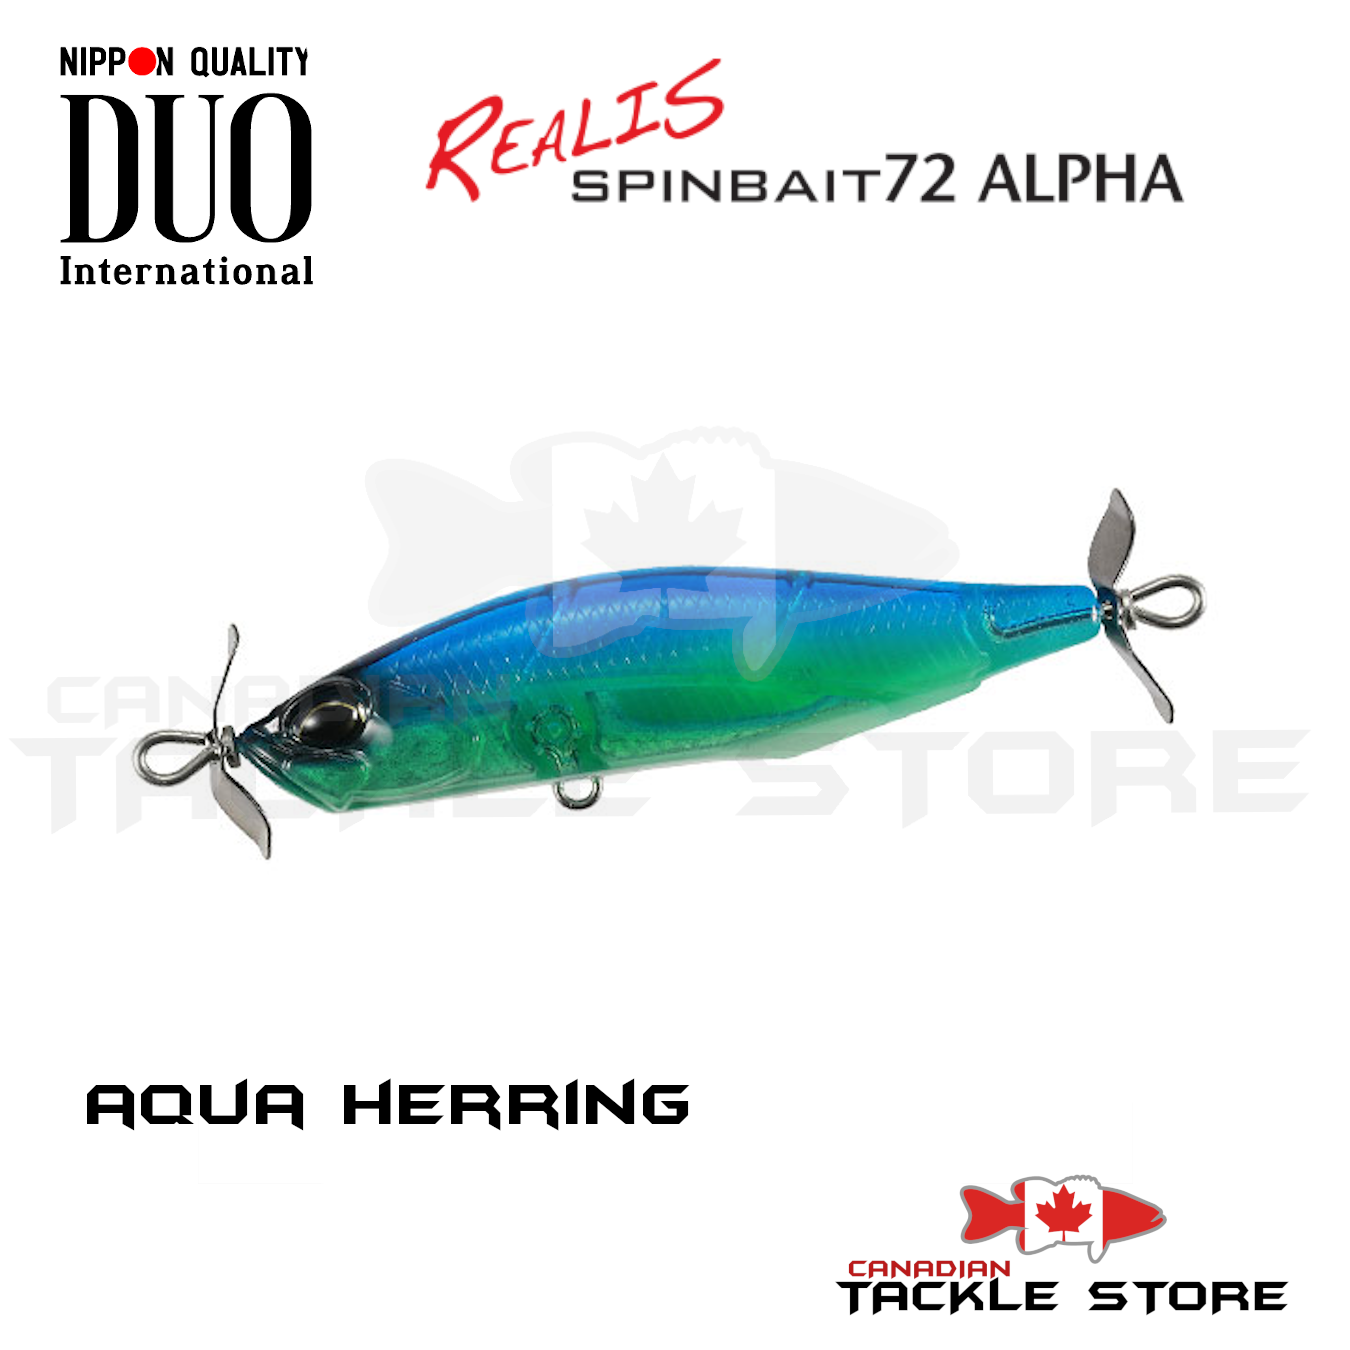 DUO Realis – Canadian Tackle Store